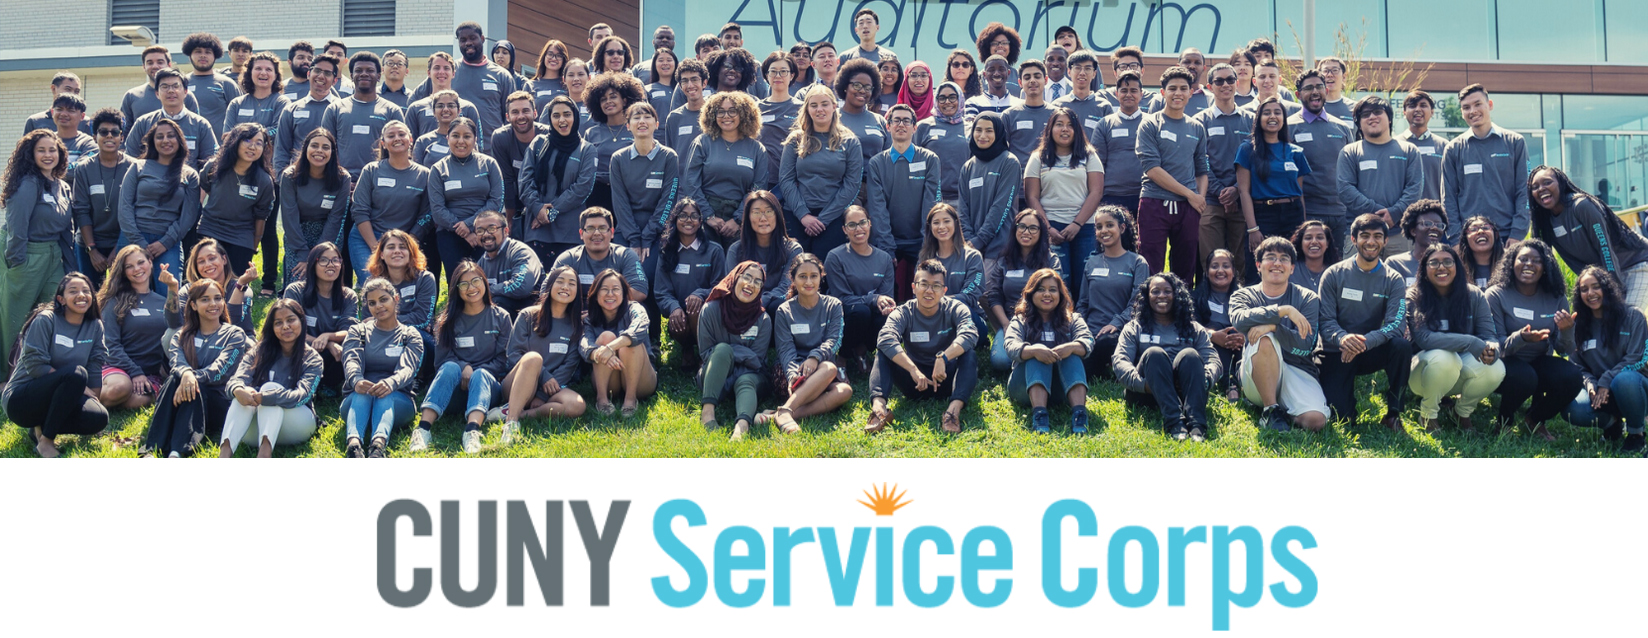 CUNY Service Corps Group Photo